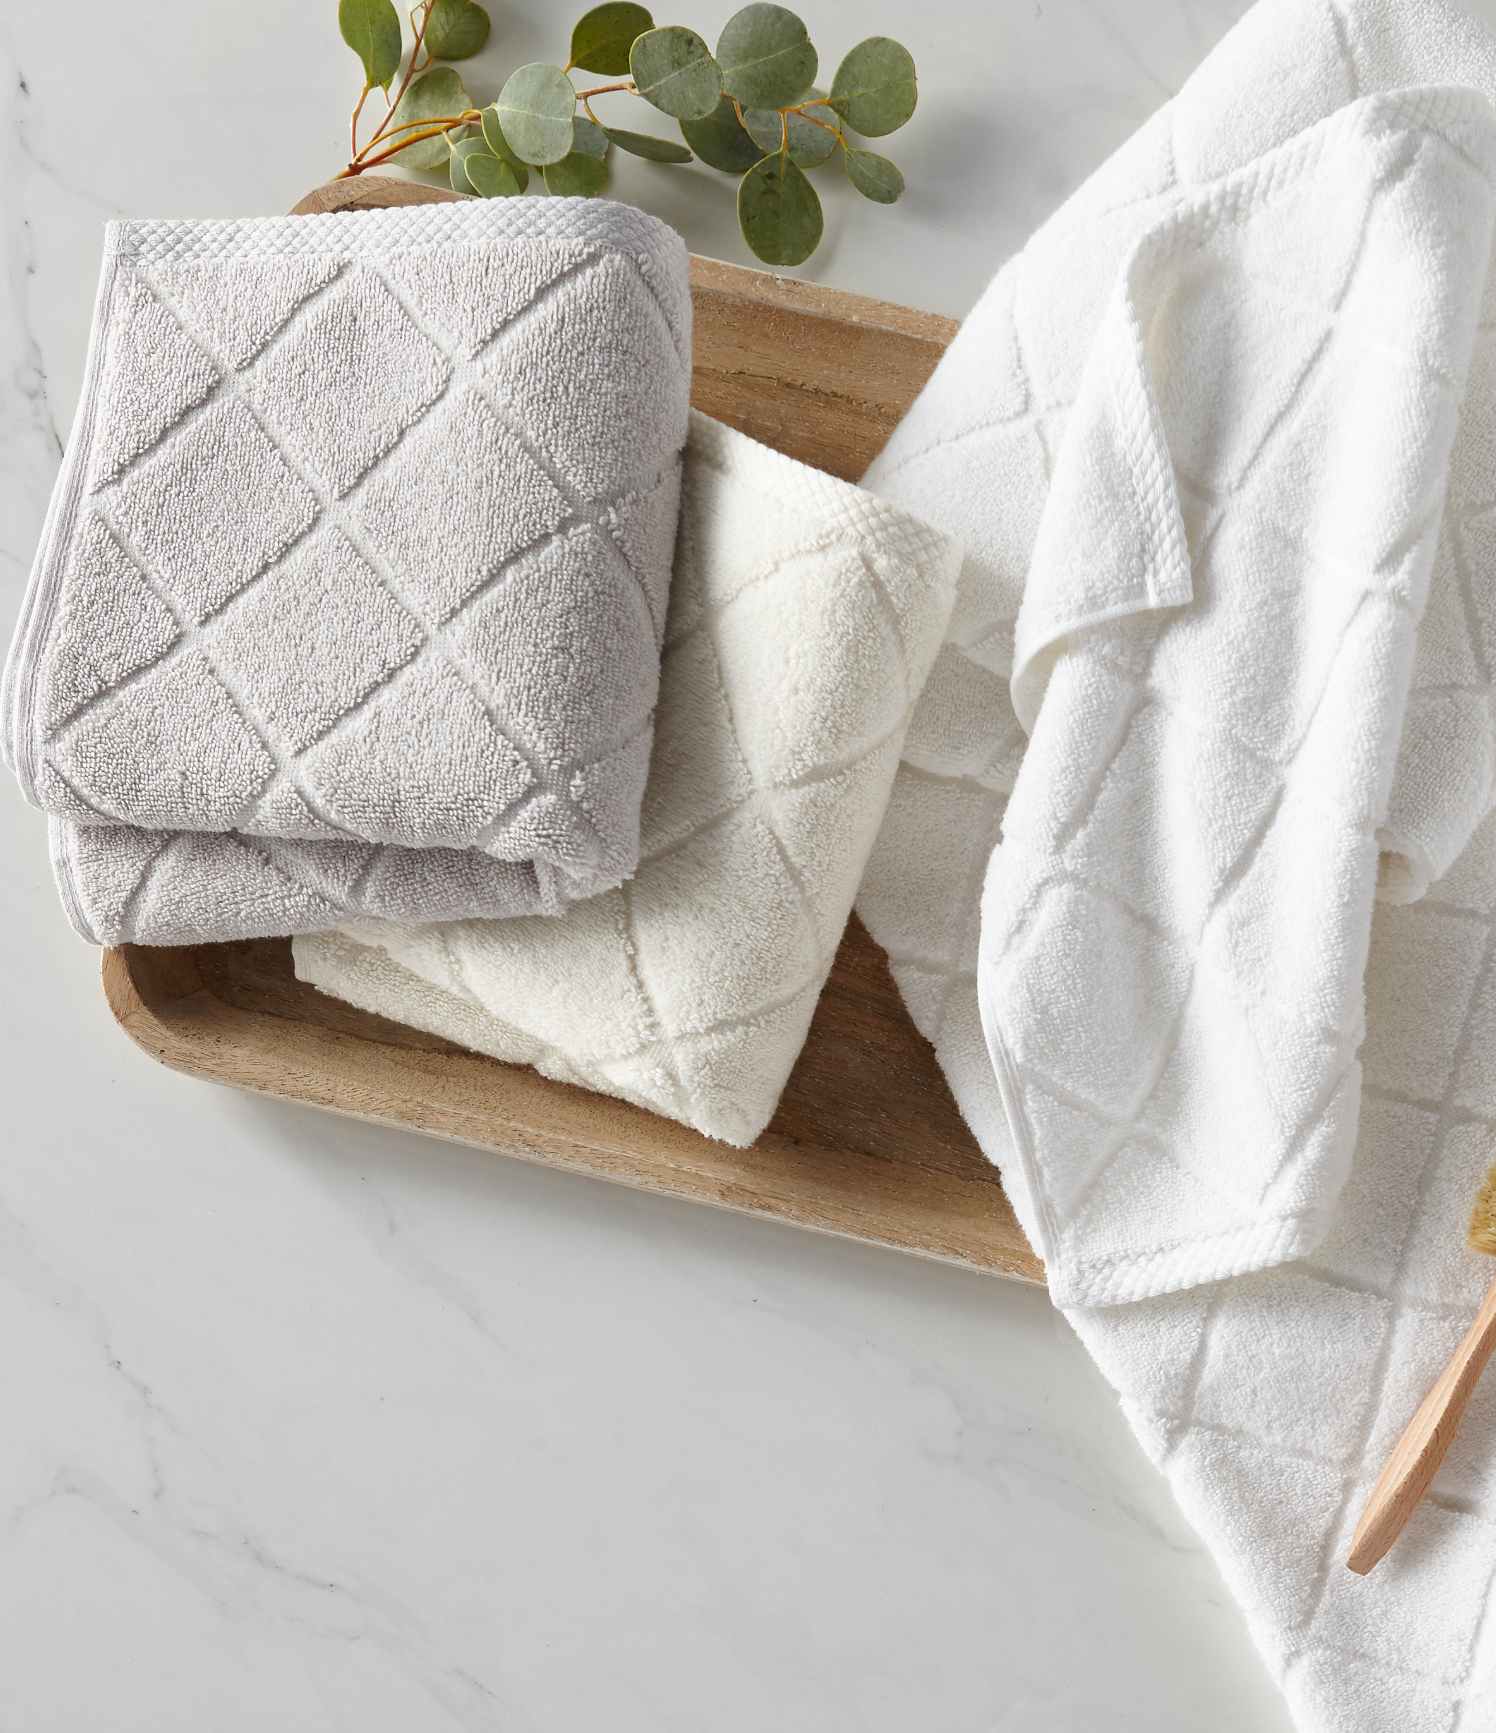 7 Reasons Linen Towels Make the Best After-Shower Experience